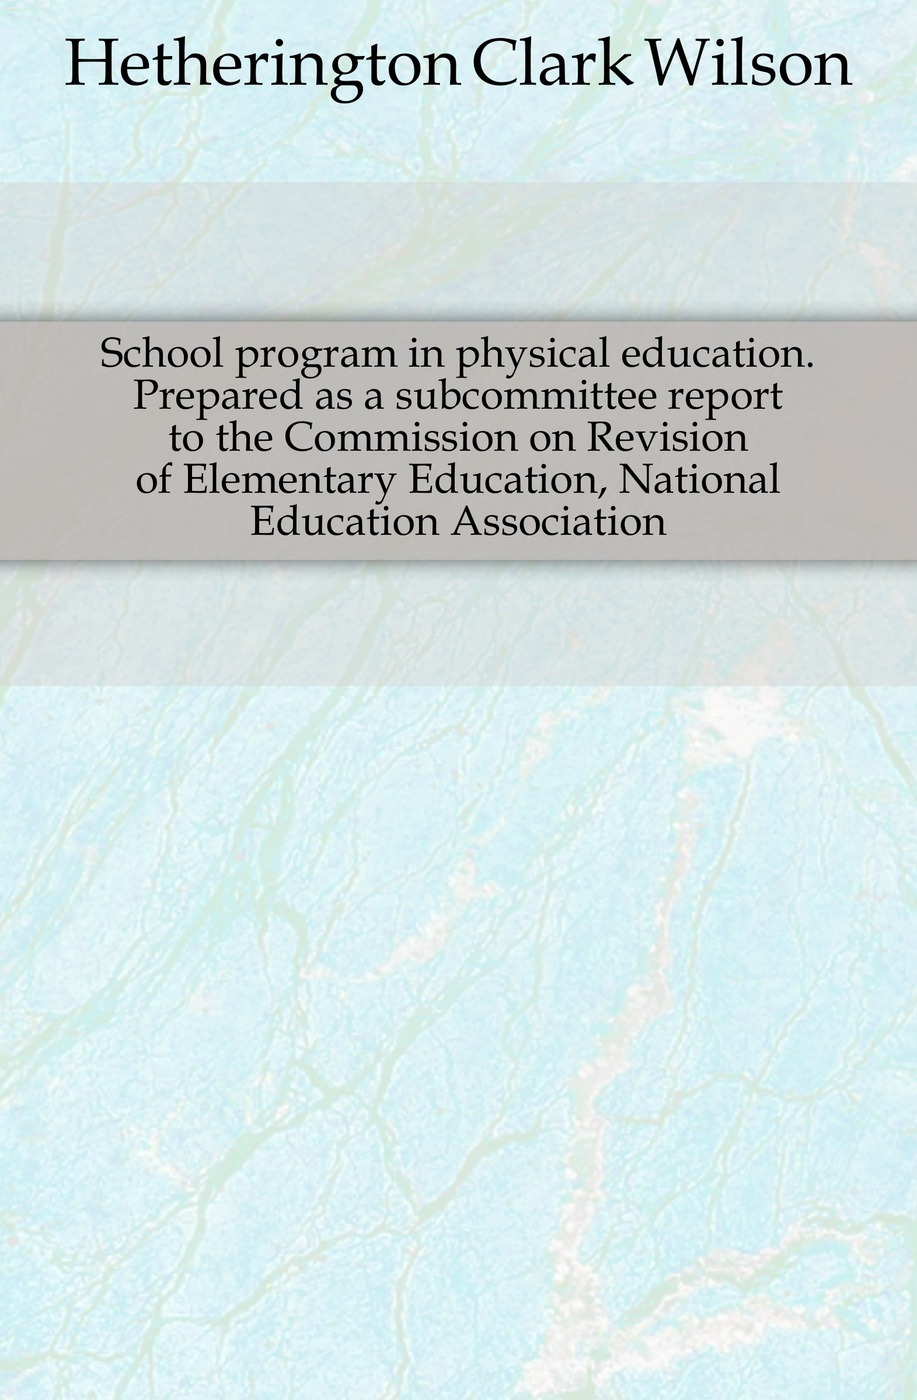 School program in physical education. Prepared as a subcommittee report to the Commission on Revision of Elementary Education, National Education Association